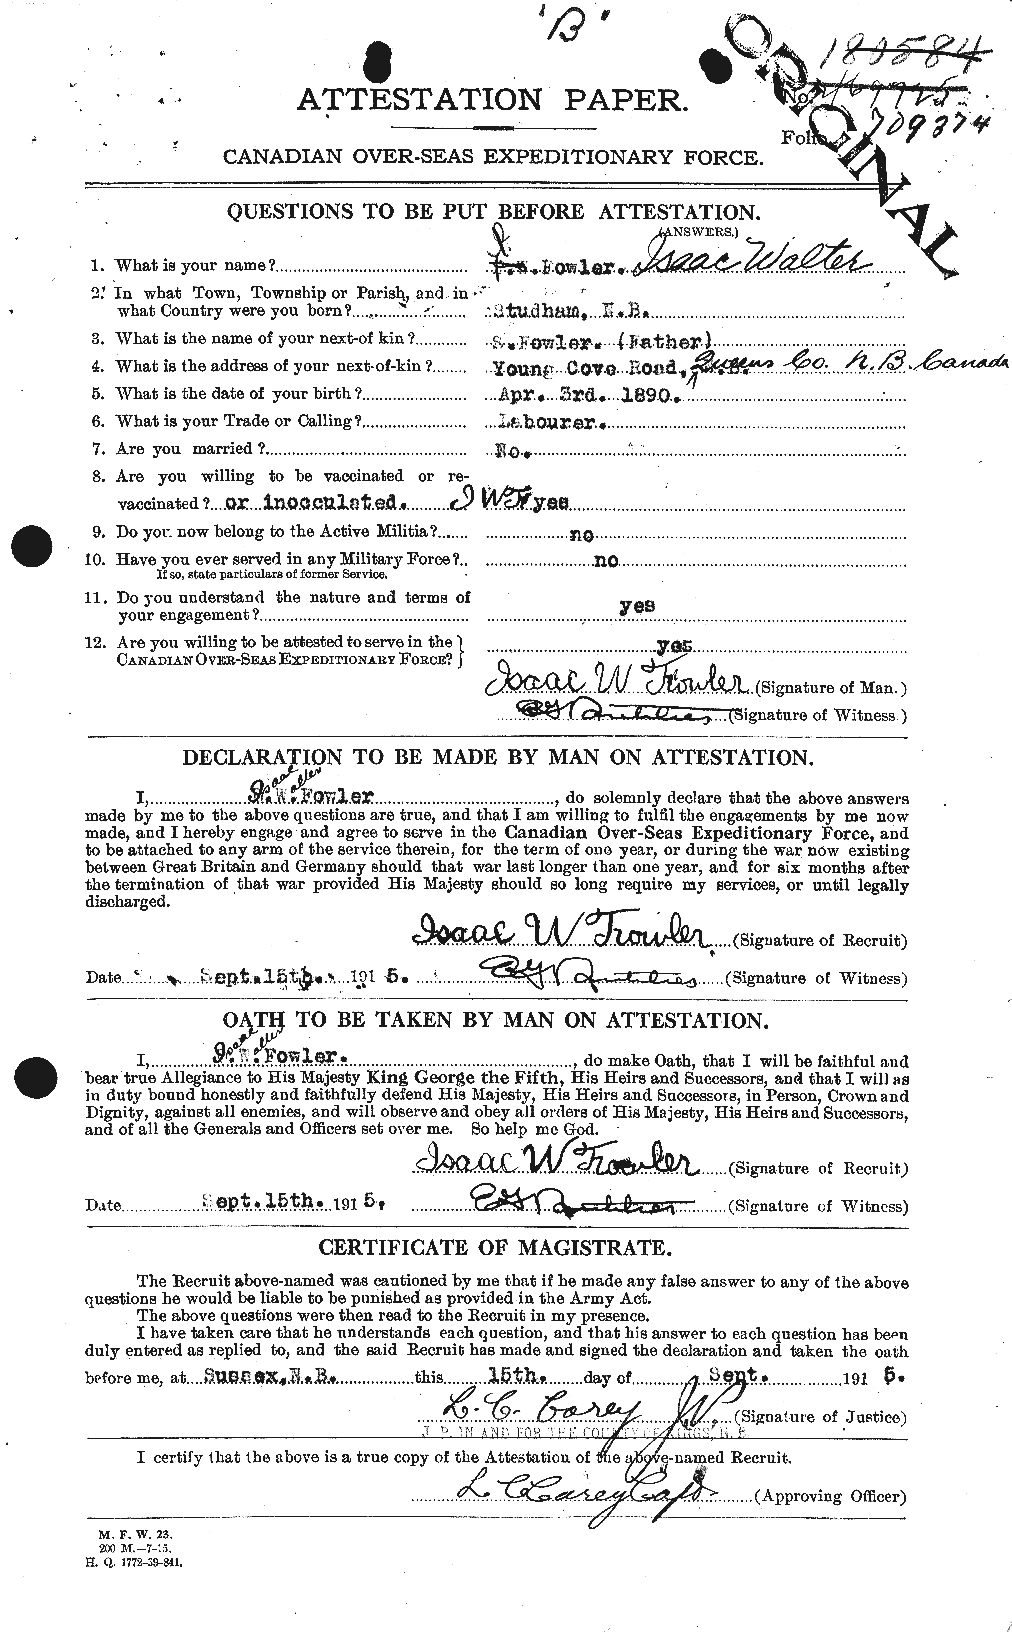 Personnel Records of the First World War - CEF 333092a